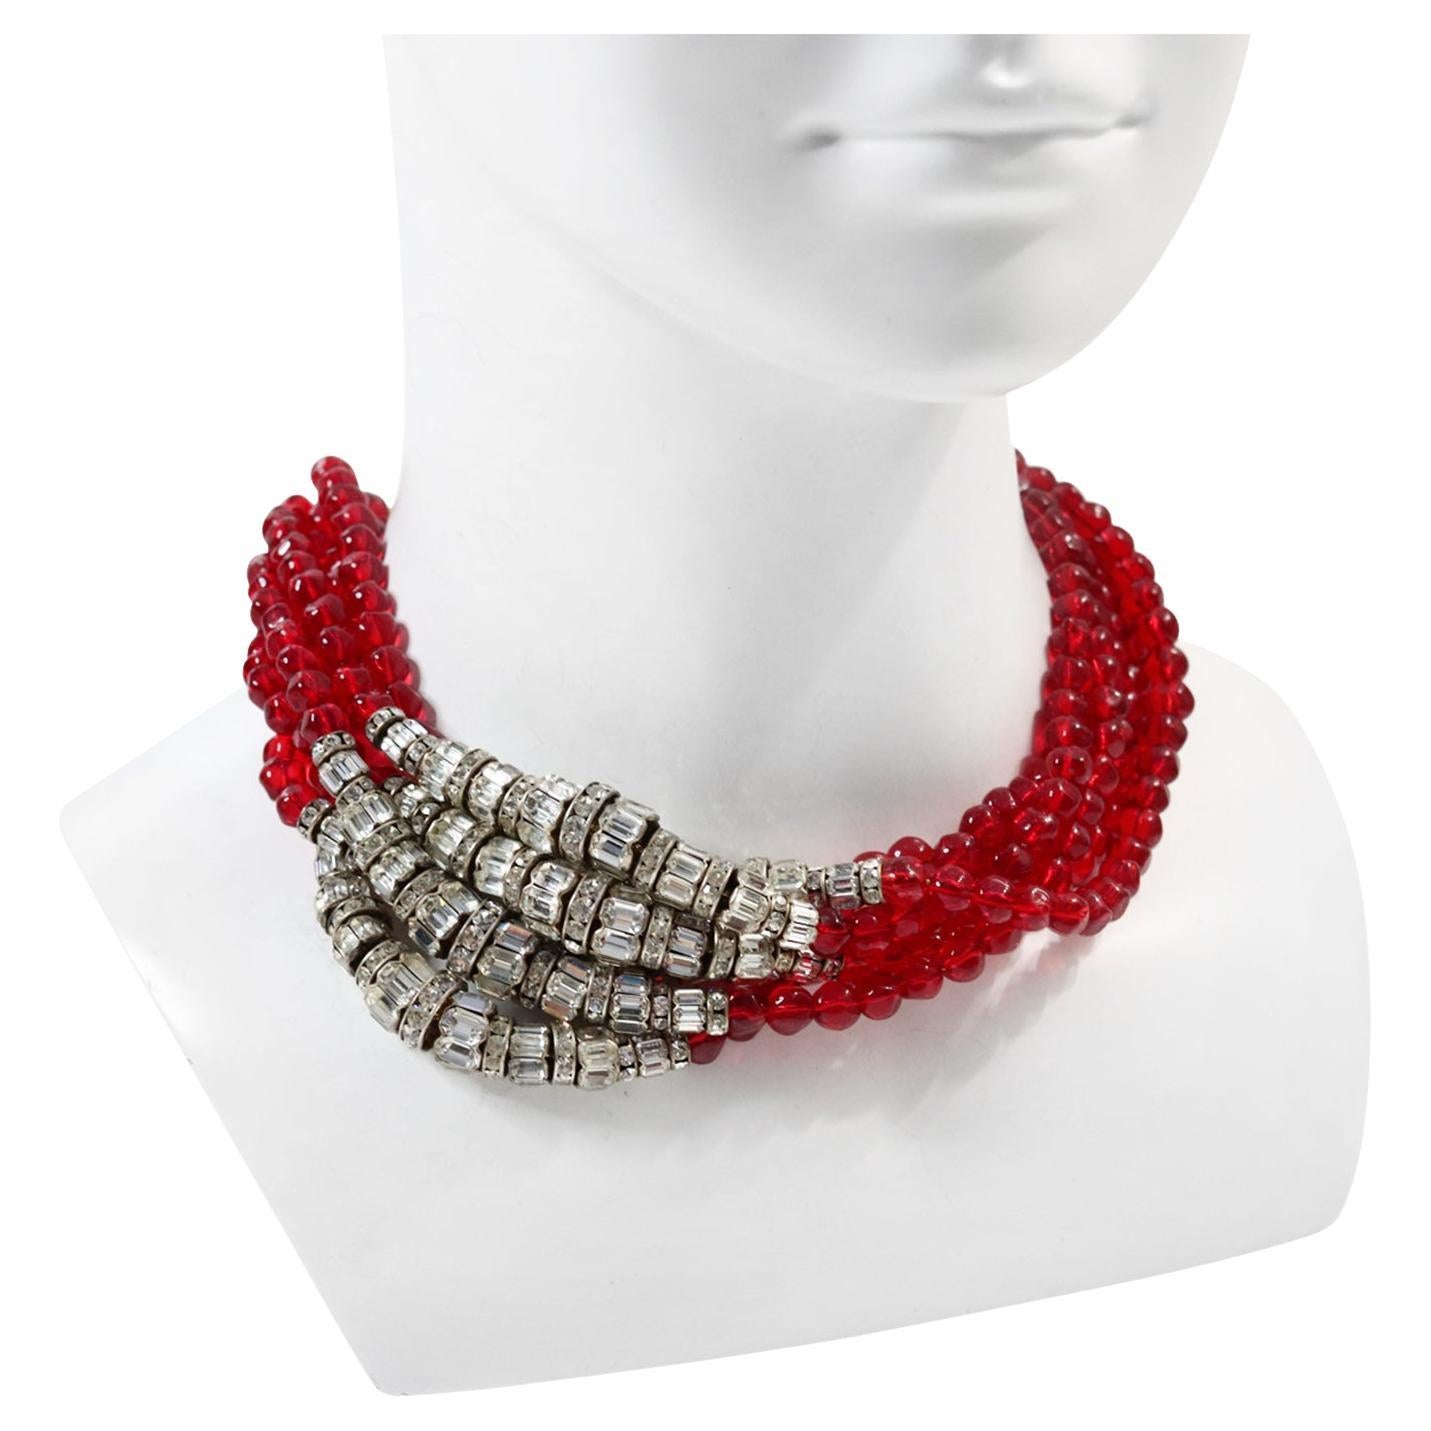 Vintage Anne Klein Couture Red and Diamante Necklace Circa 1980s.  This necklace is magnificent.  Anne Klein made a very few couture pieces and they are just magnificent.  I have one in my own collection and not sure I will ever part with it.  They